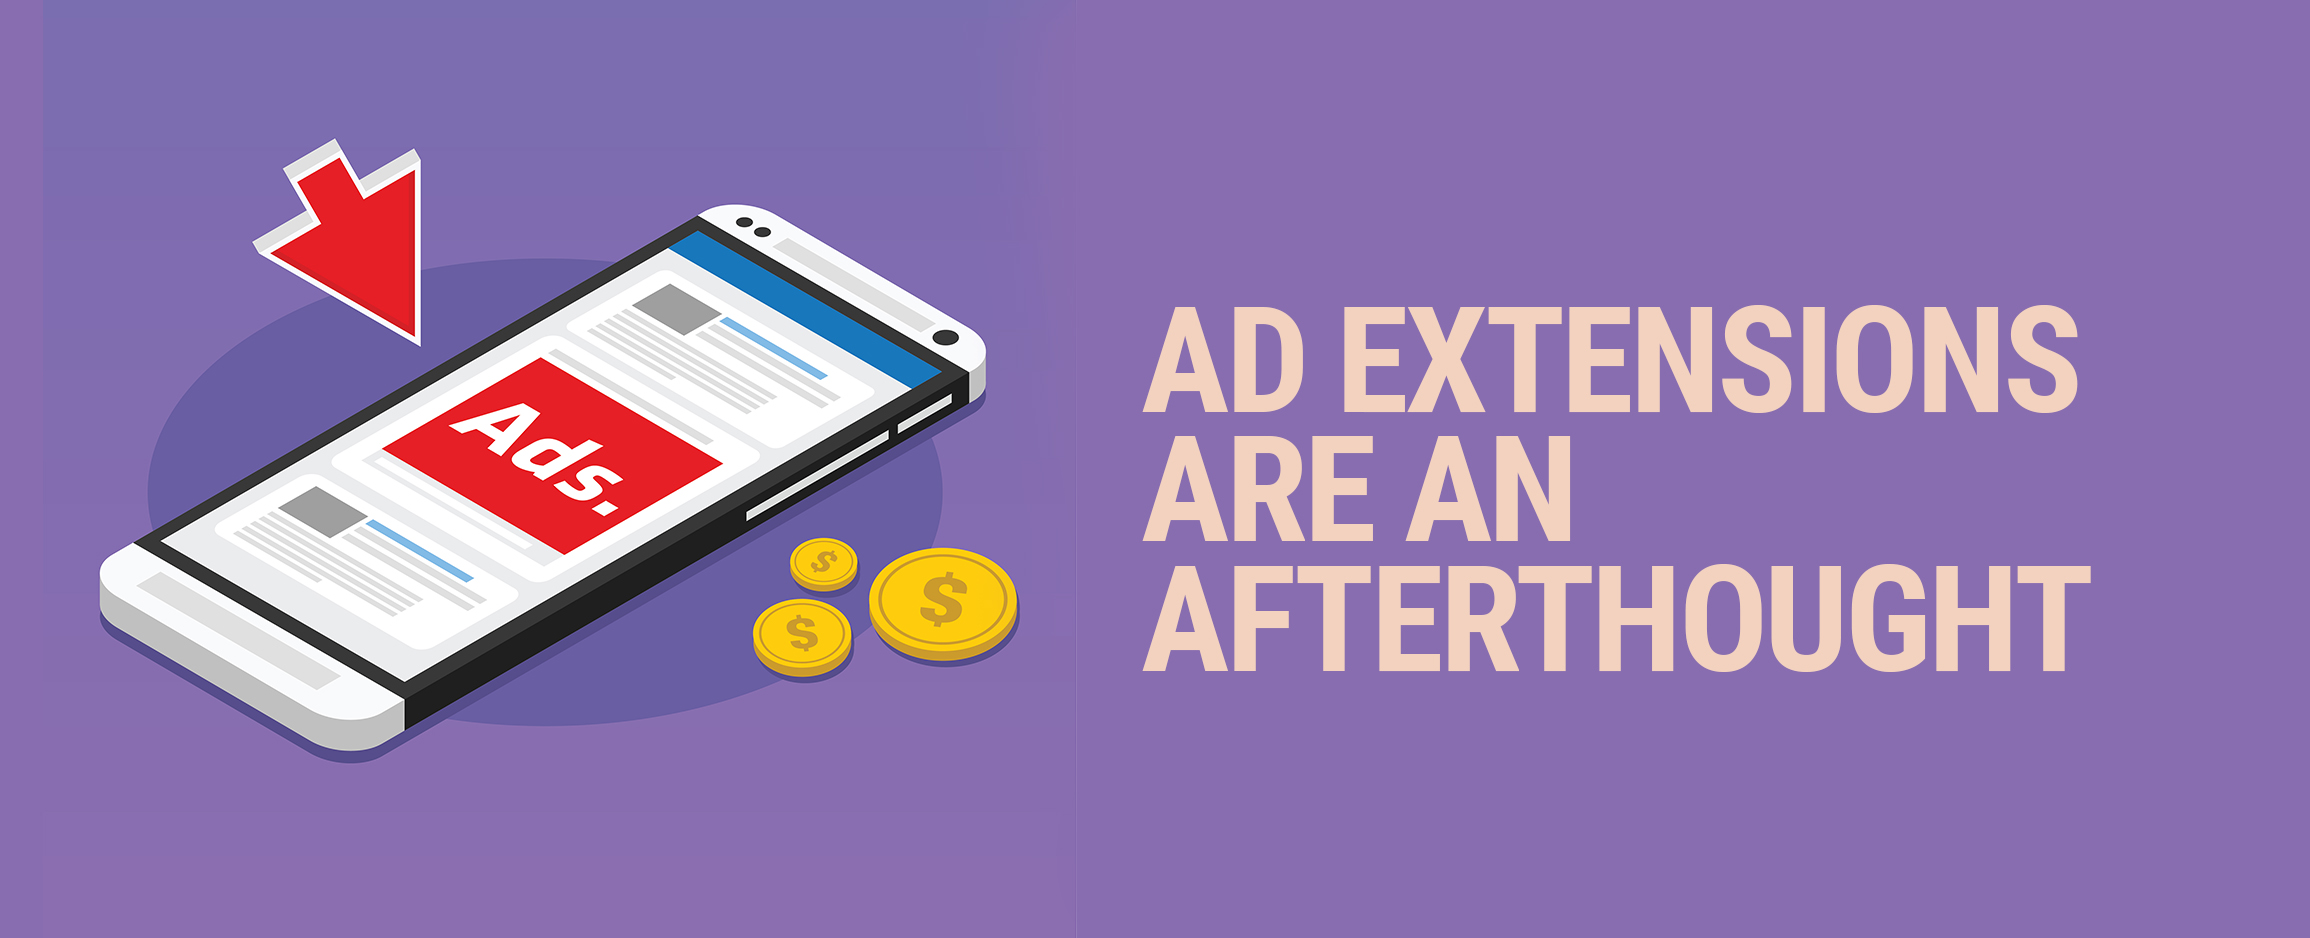 Ad Extensions Are An Afterthought